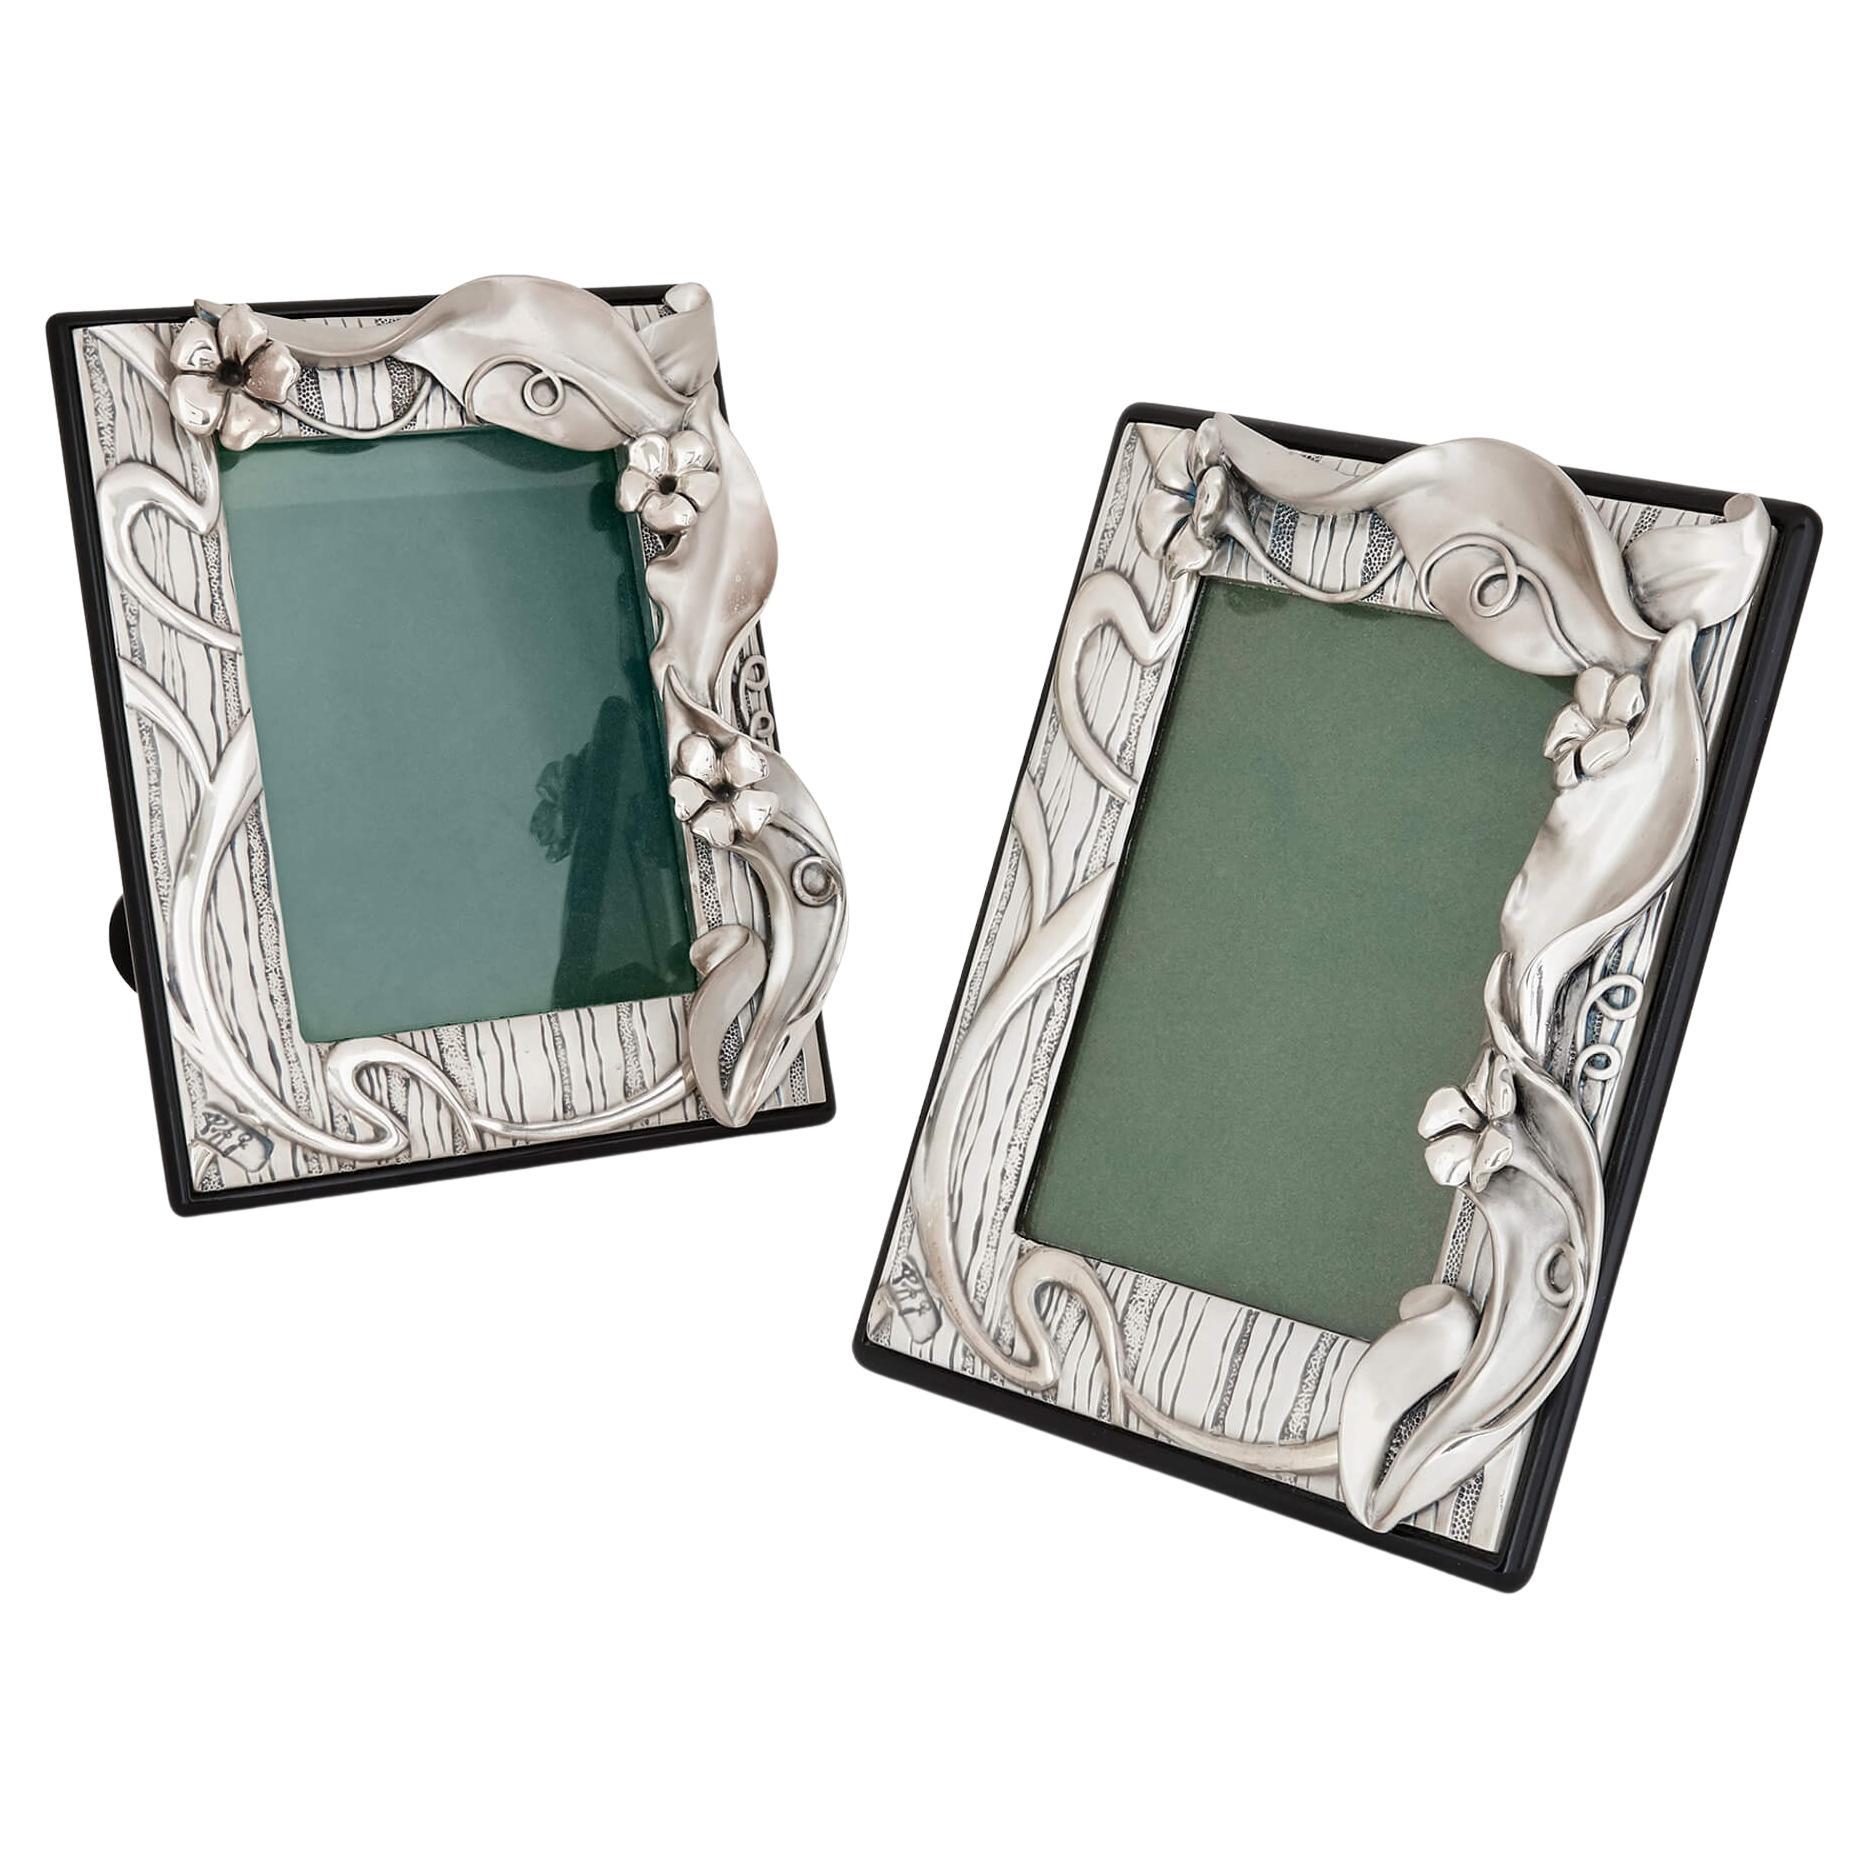 Pair of Italian Silver Picture Frames in the Art Nouveau Style